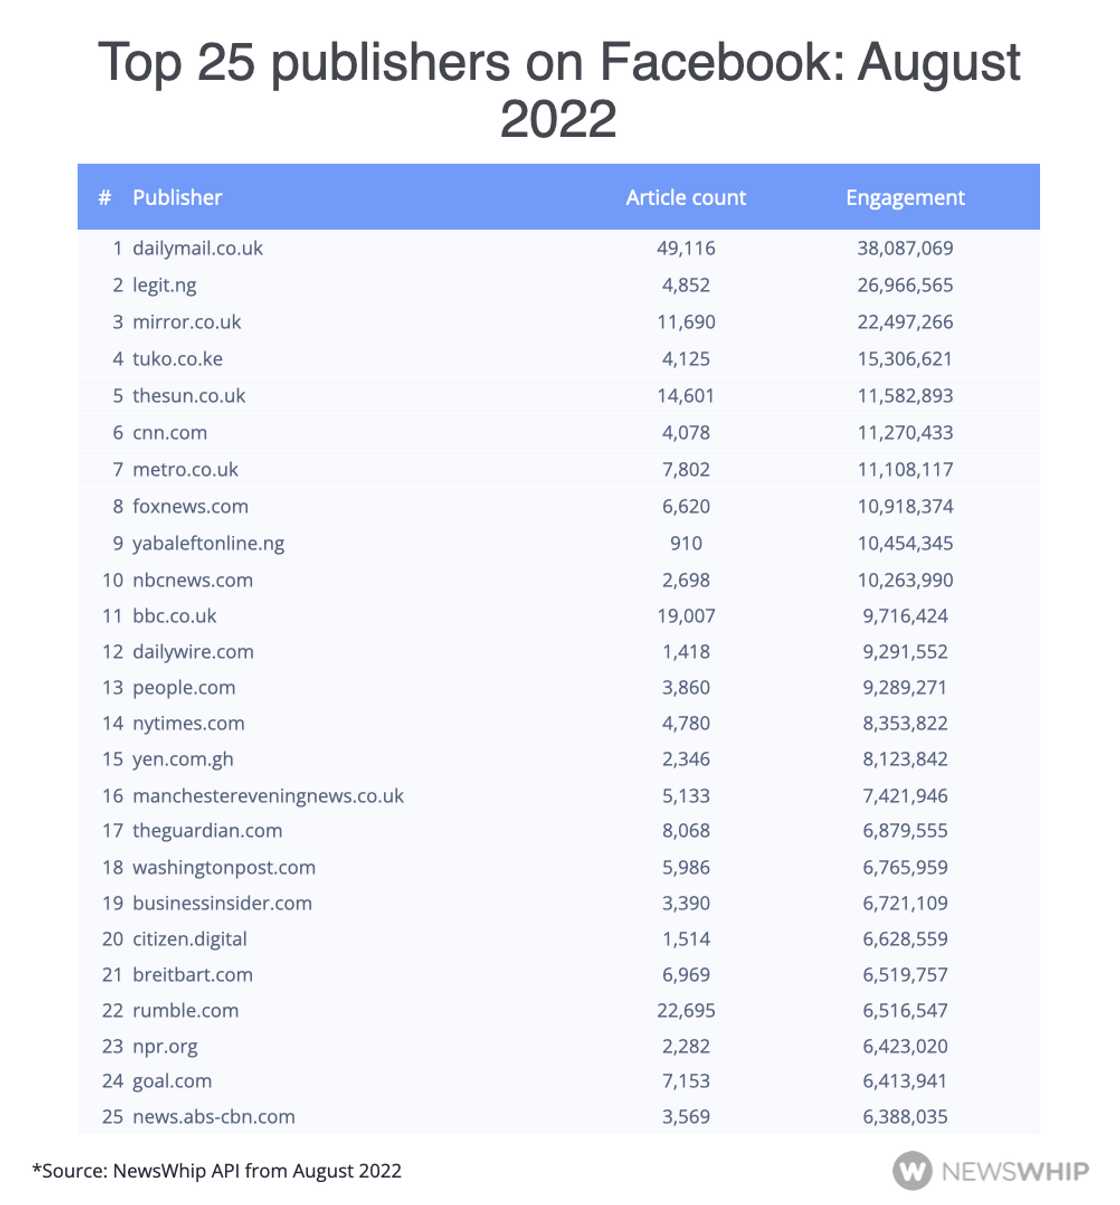 Top publishers on Facebook